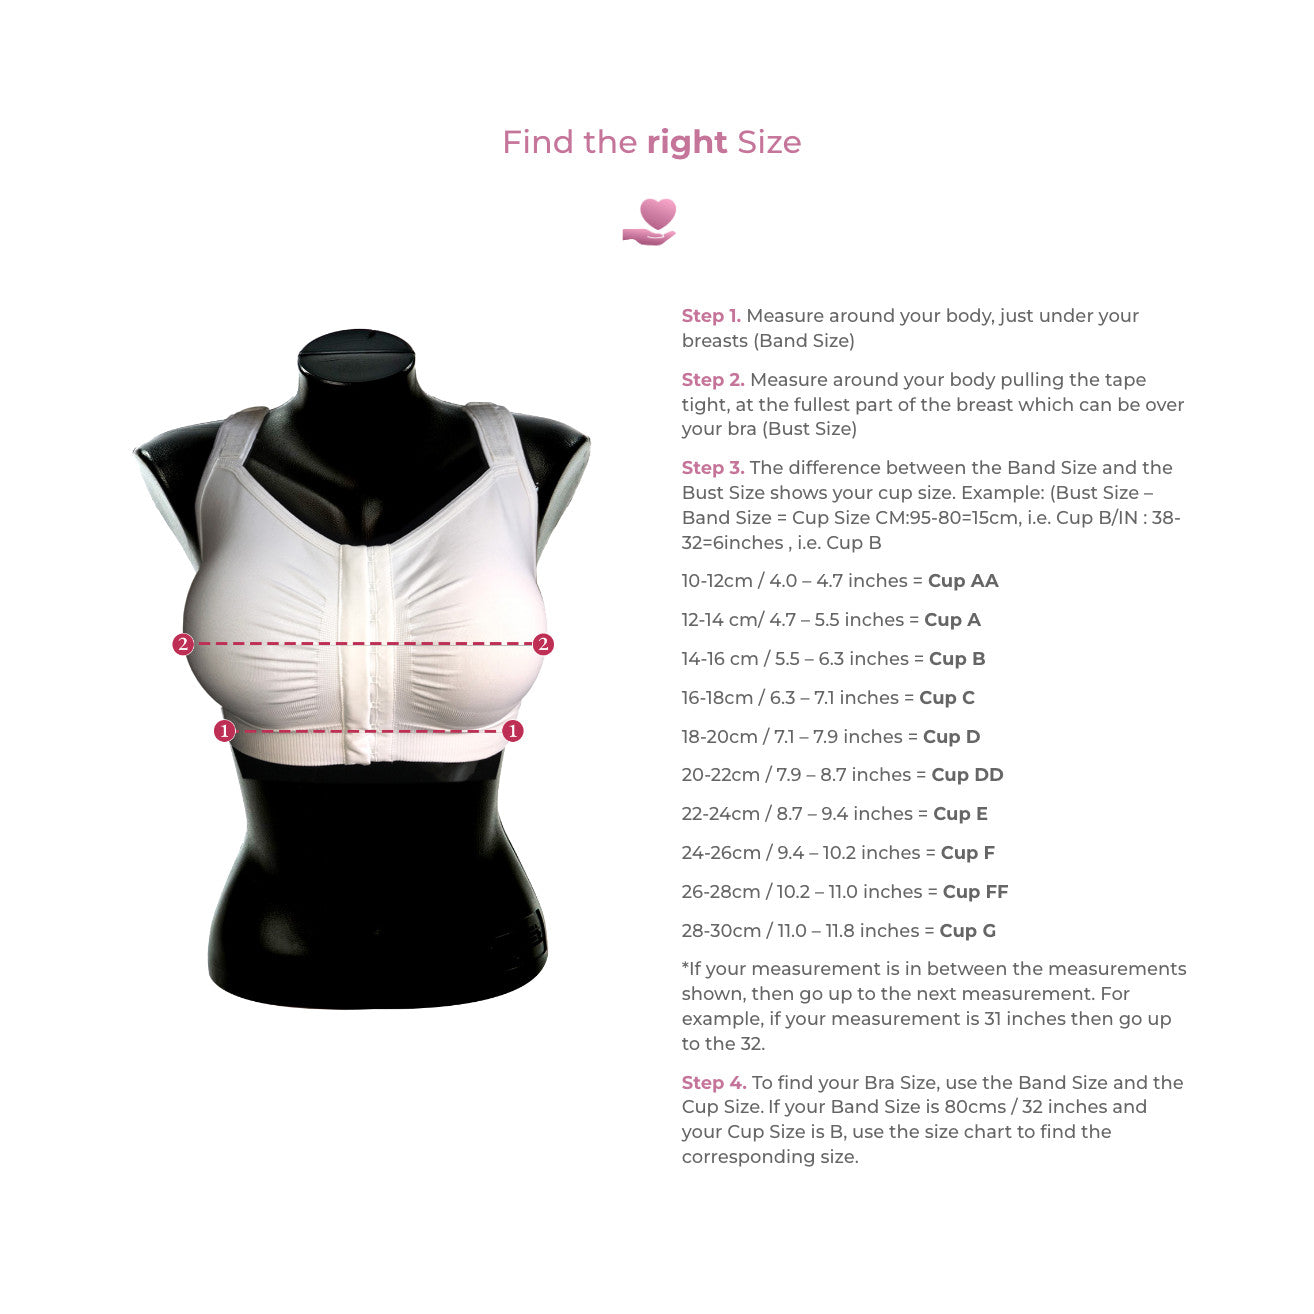 Reco Heart Post-Surgical Bra